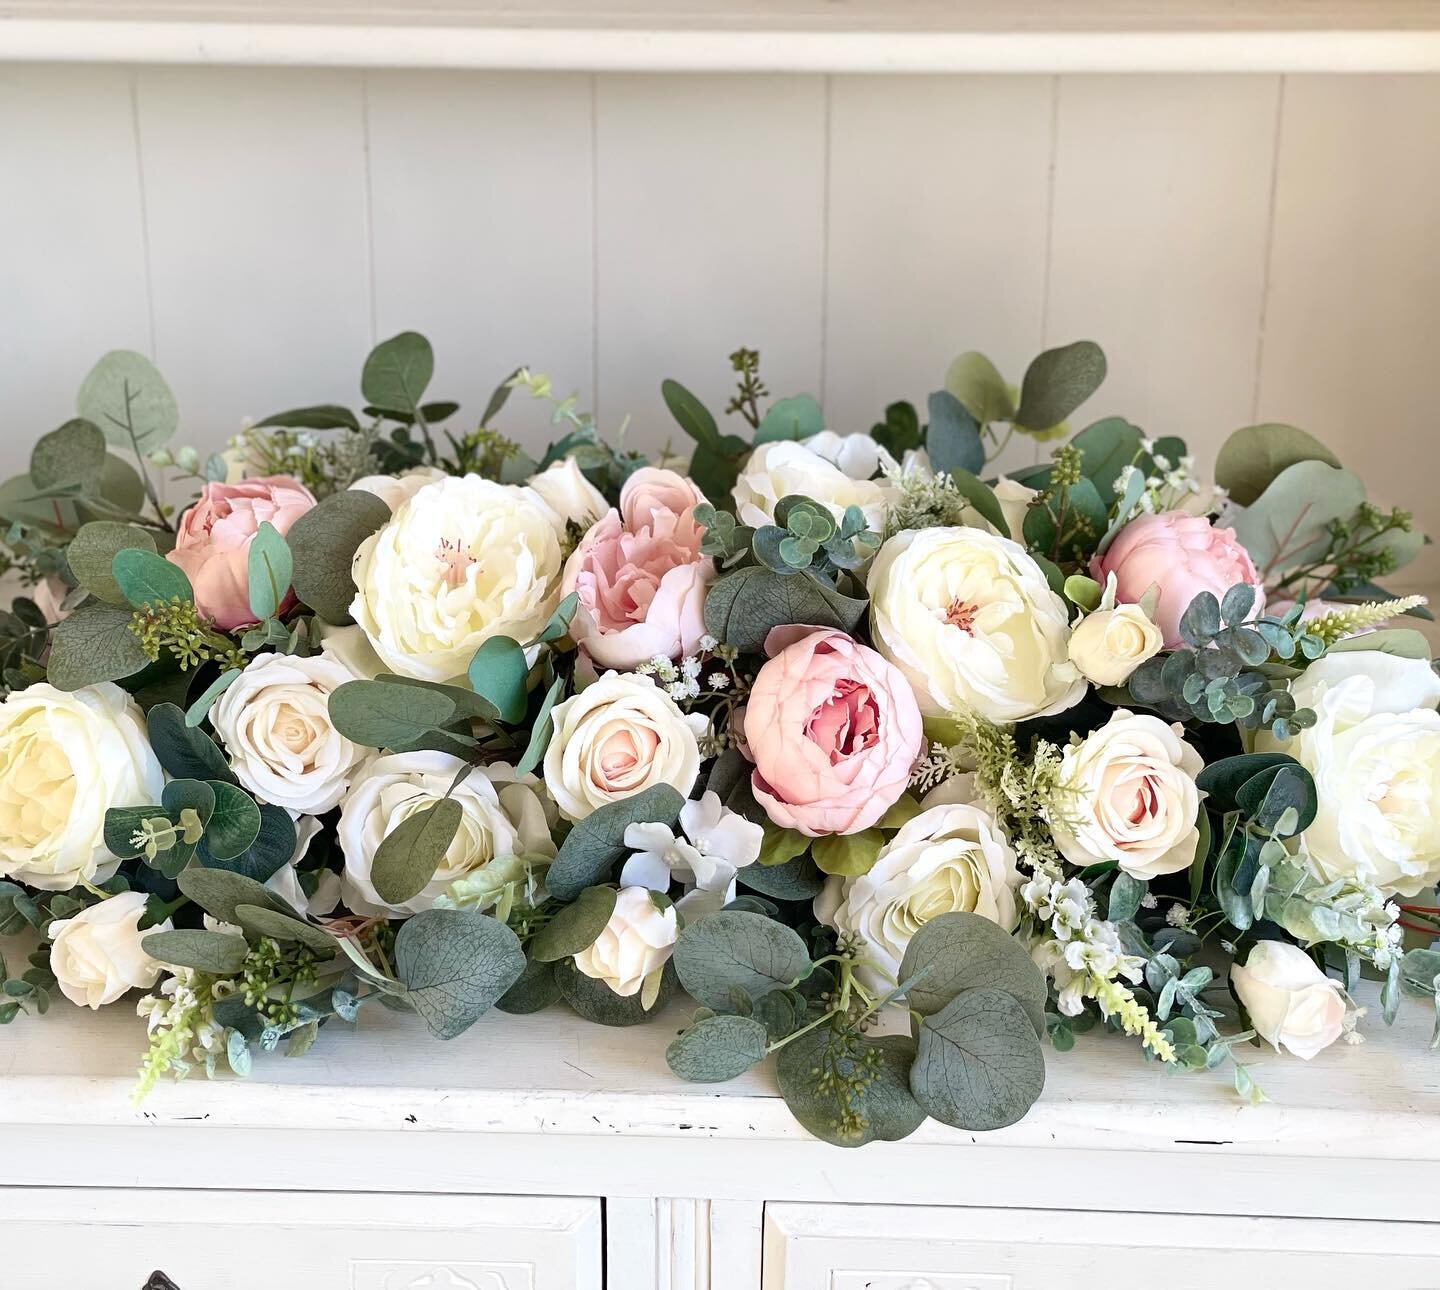 Beautiful ivory and blush pink ceremony table arrangement filled with roses and peonies #weddingflowers #weddingceremonyflowers #ceremonydecor